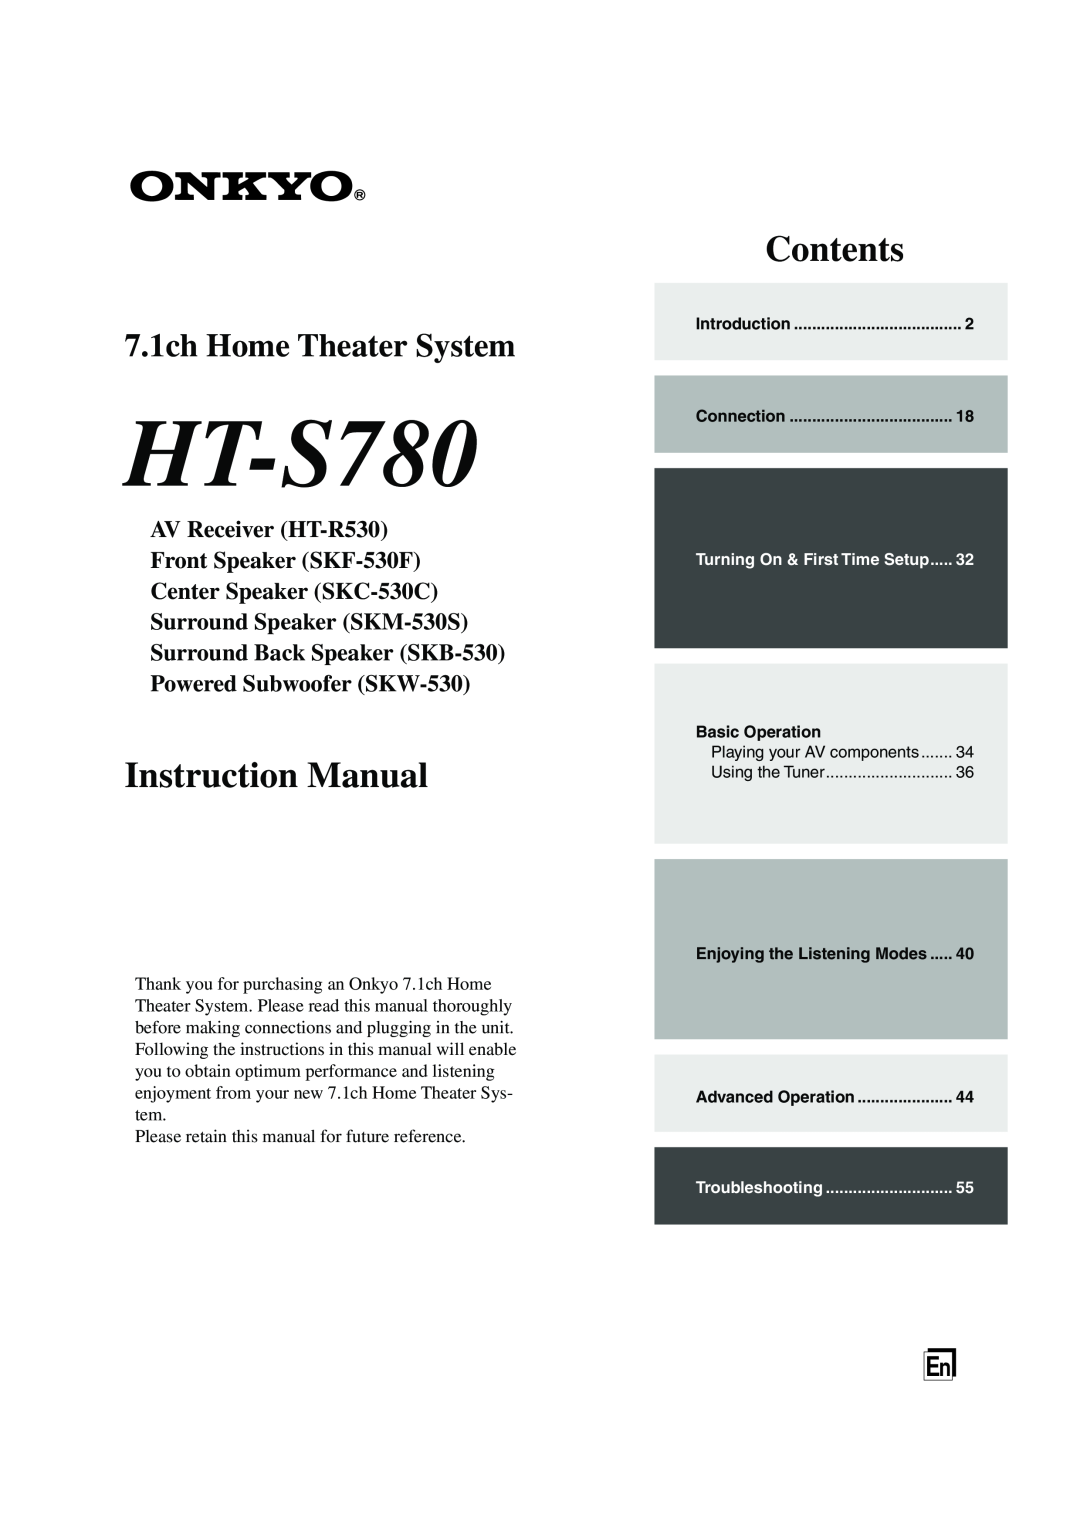 Onkyo HT-S780 instruction manual Instruction Manual, Contents, 7.1ch Home Theater System, Surround Back Speaker SKB-530 